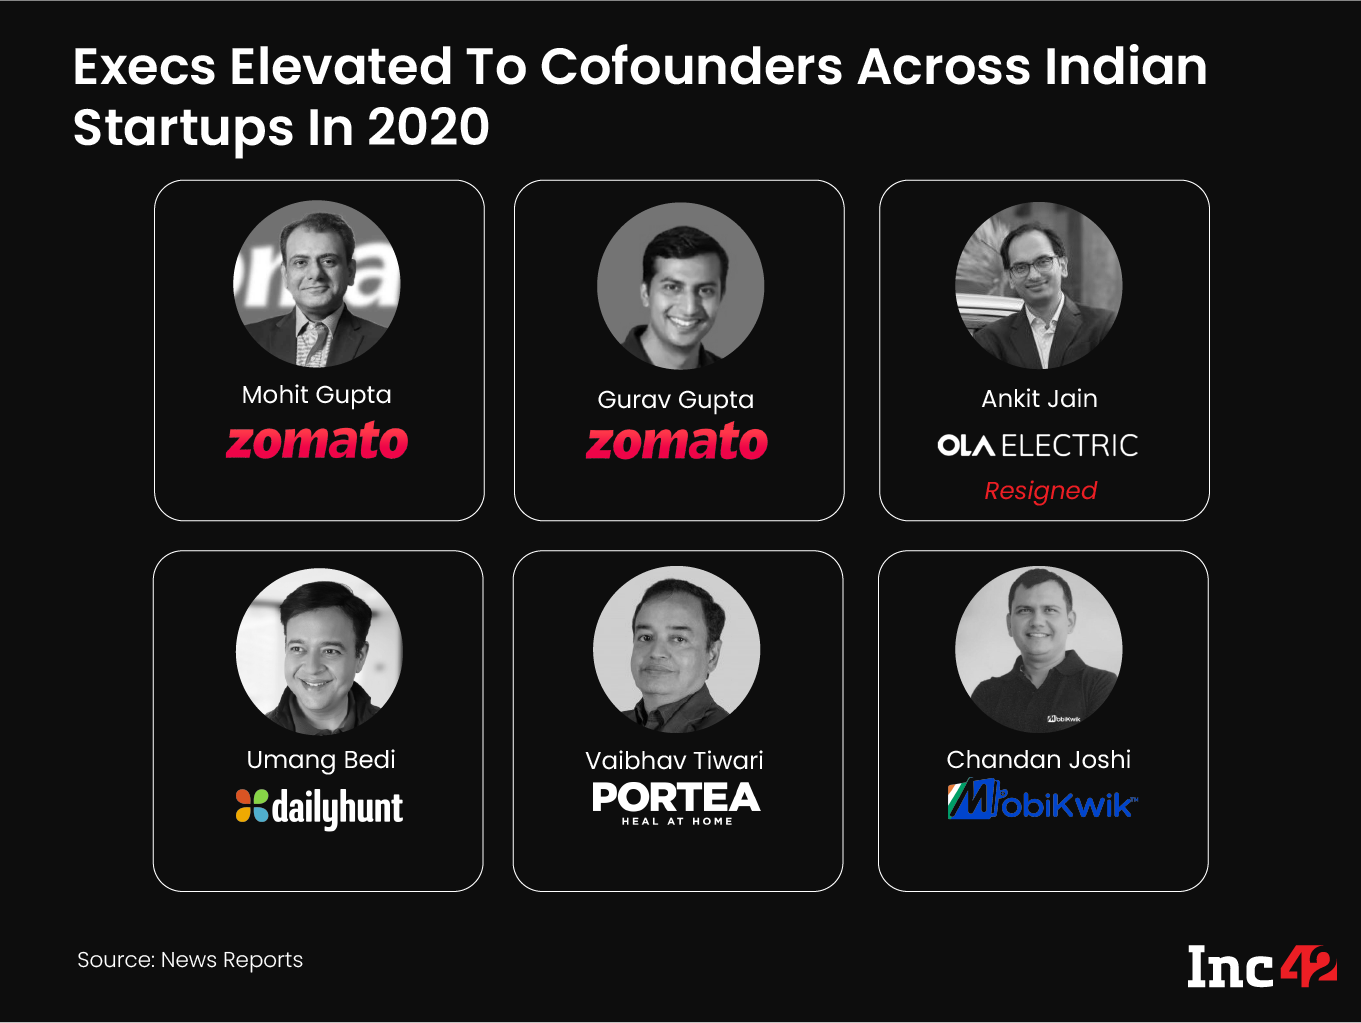 Execs Elevated to Cofounders Across Indian Startups